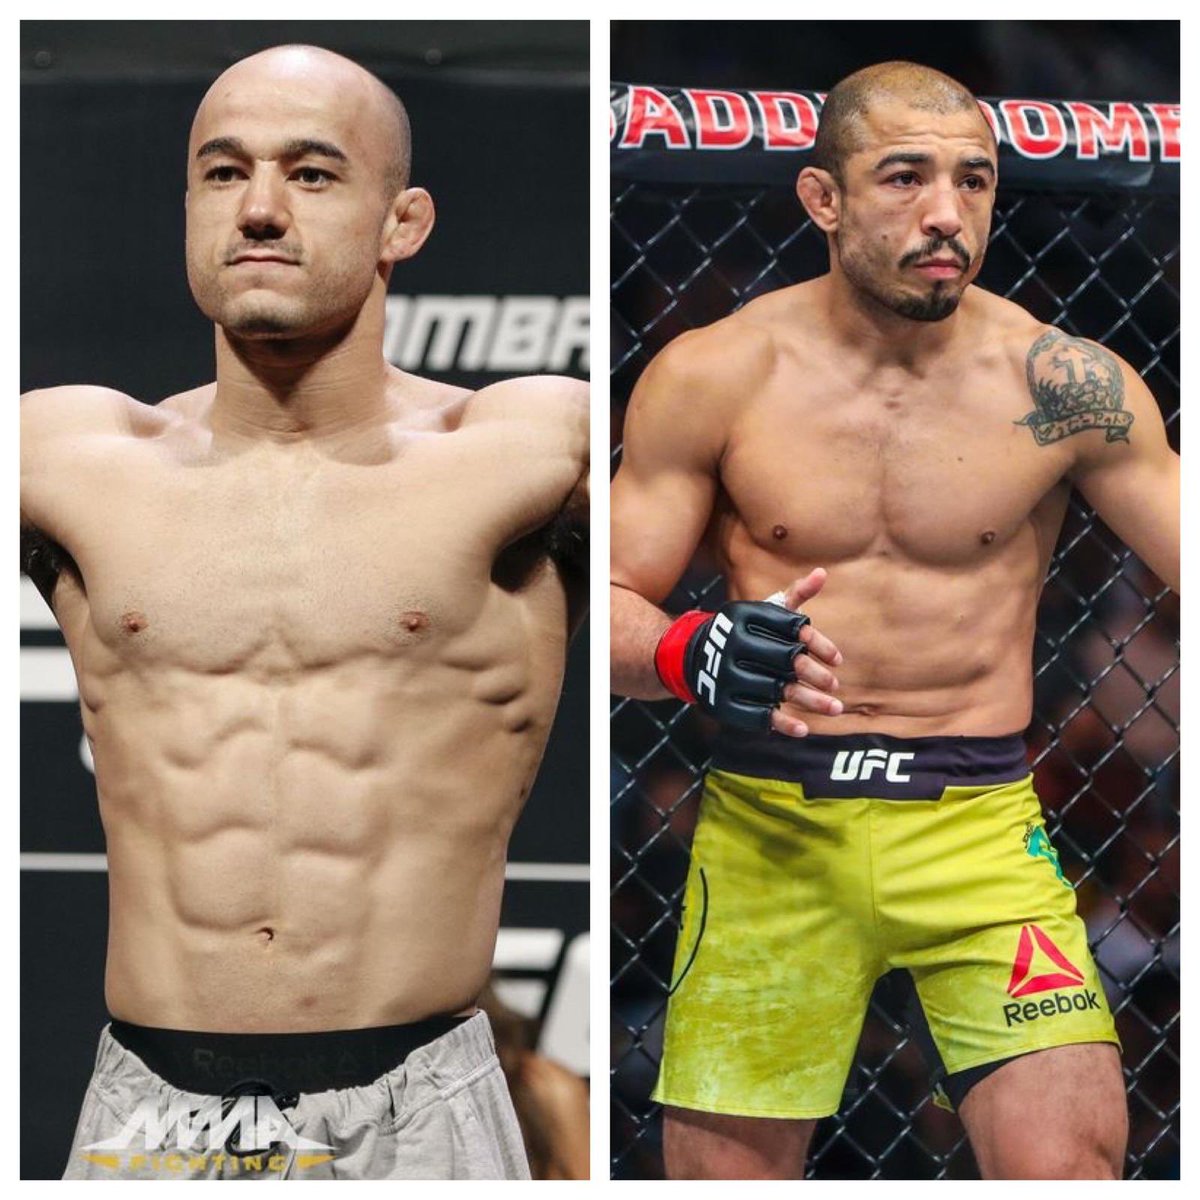 Ali Abdelaziz on Twitter: "I'm hearing that Aldo is moving down to 135 lb he is a legend and deserves a big fight... @mmarlonmoraes number one and ready for